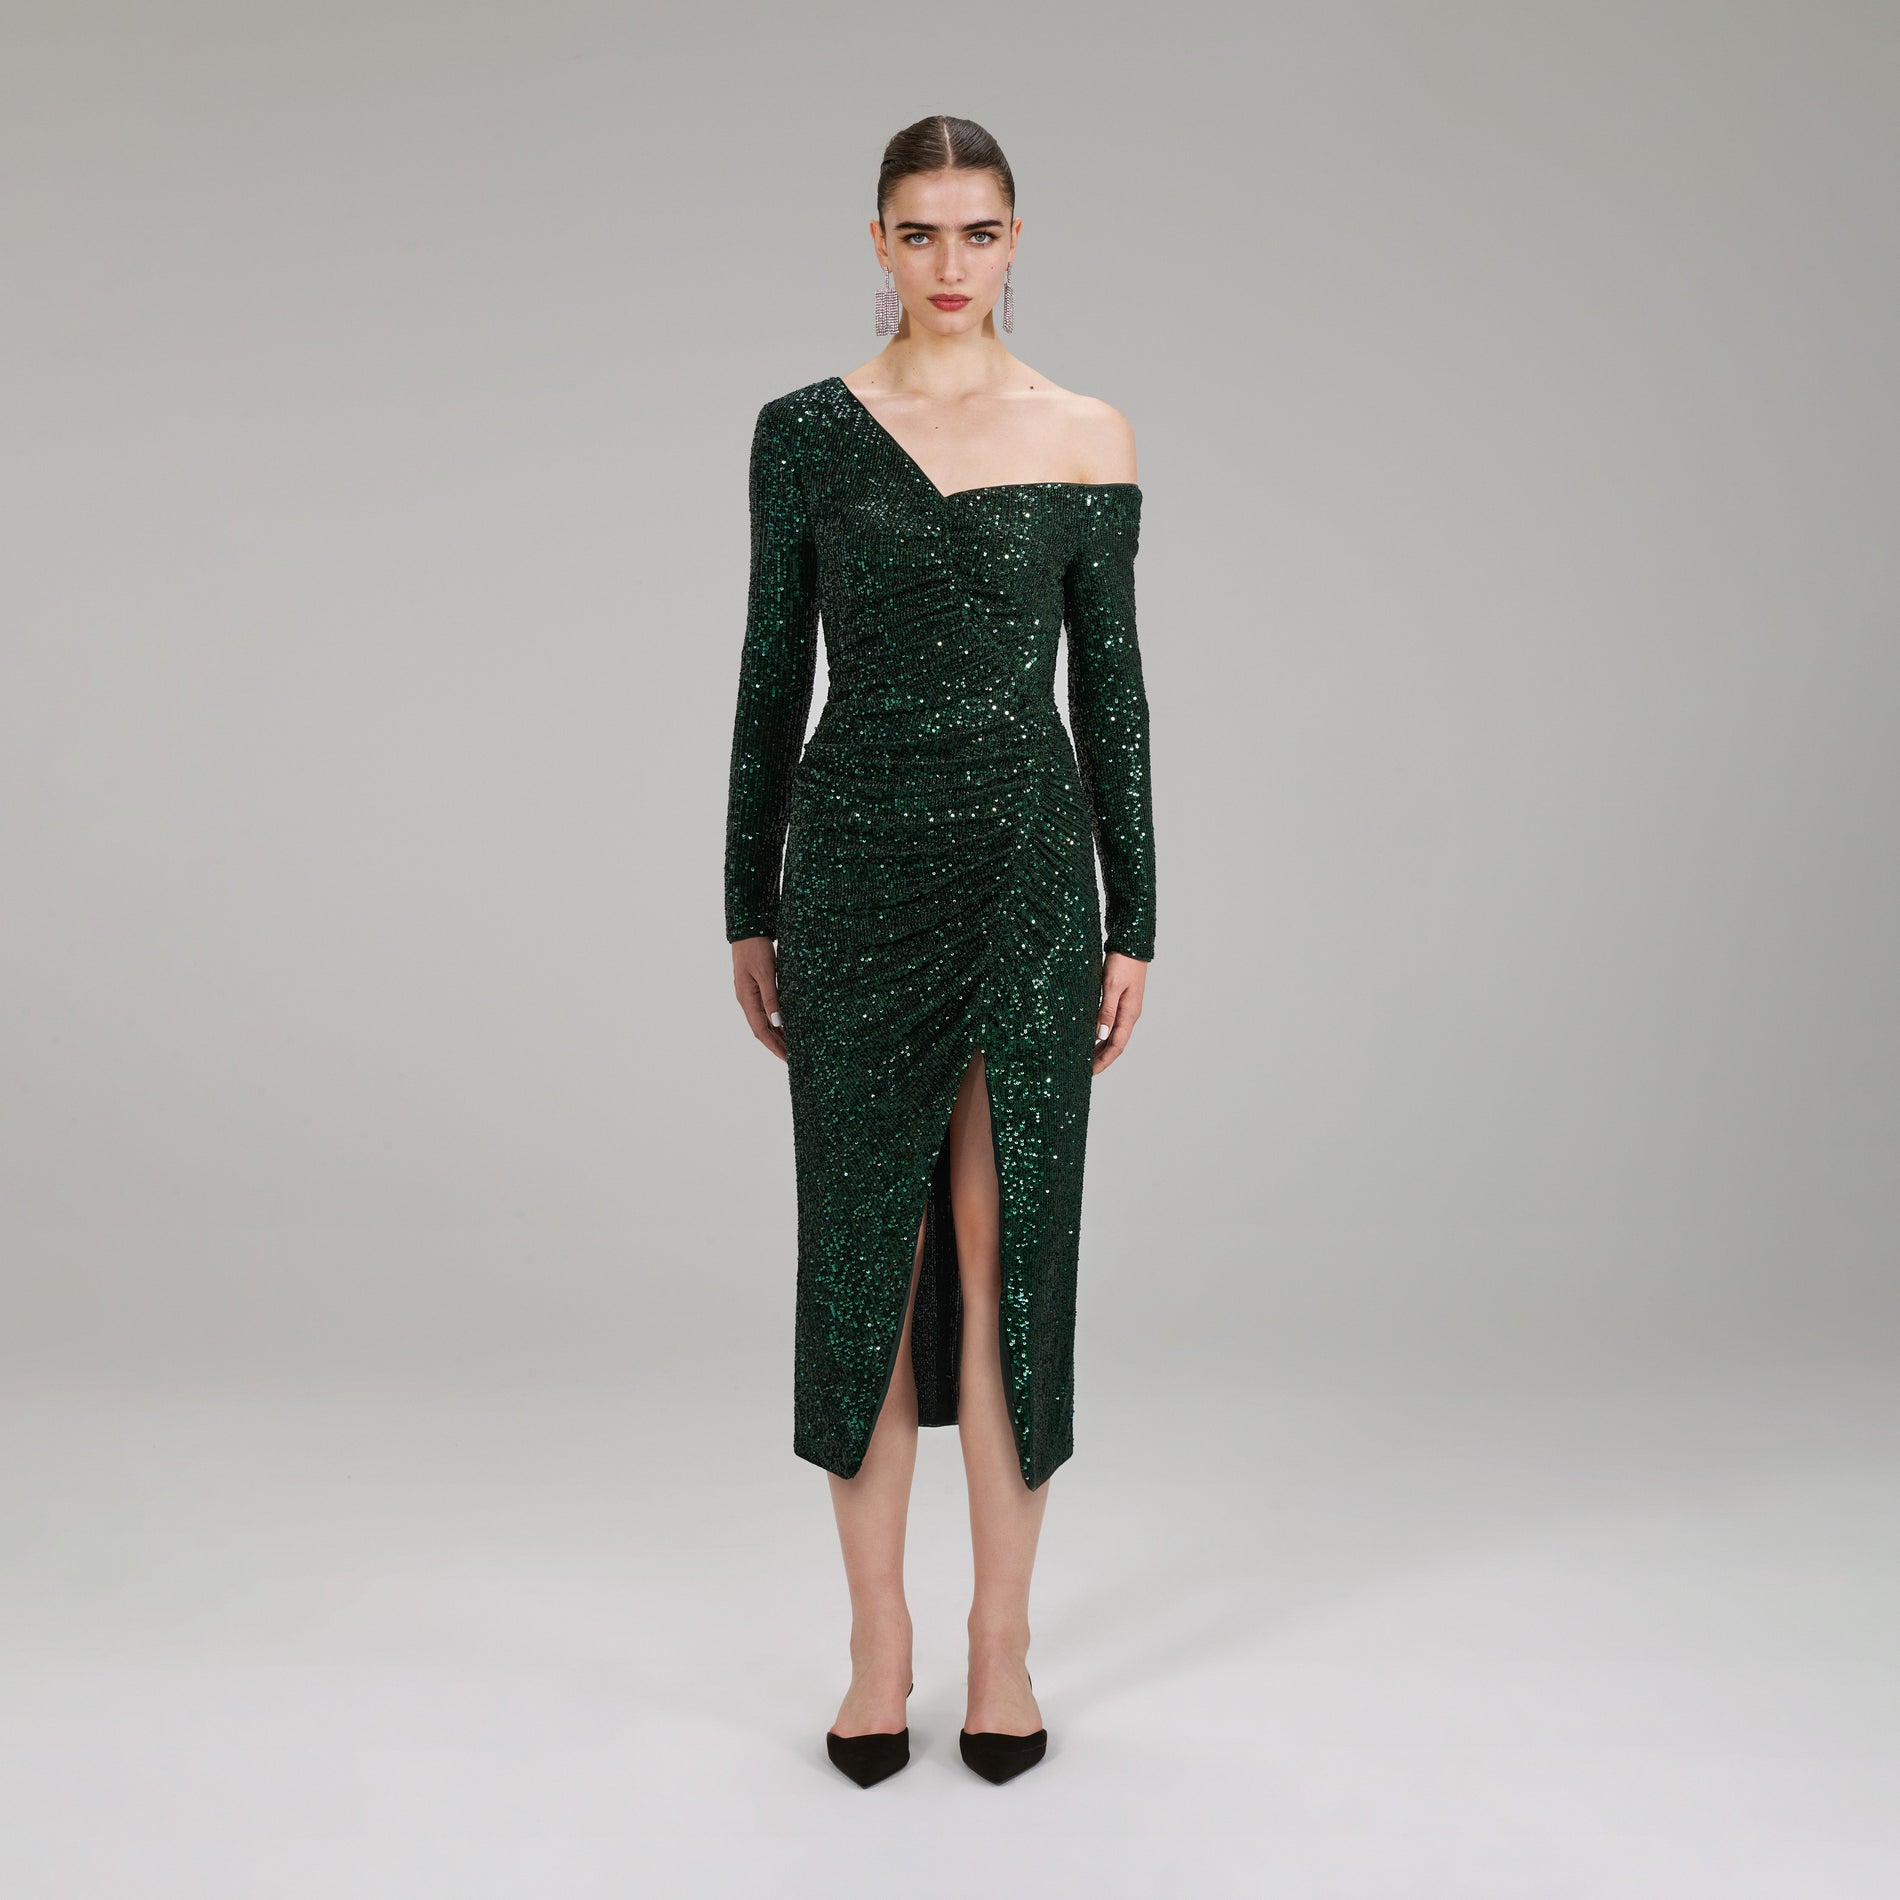 A woman wearing the Green Stretch Sequin Midi Dress